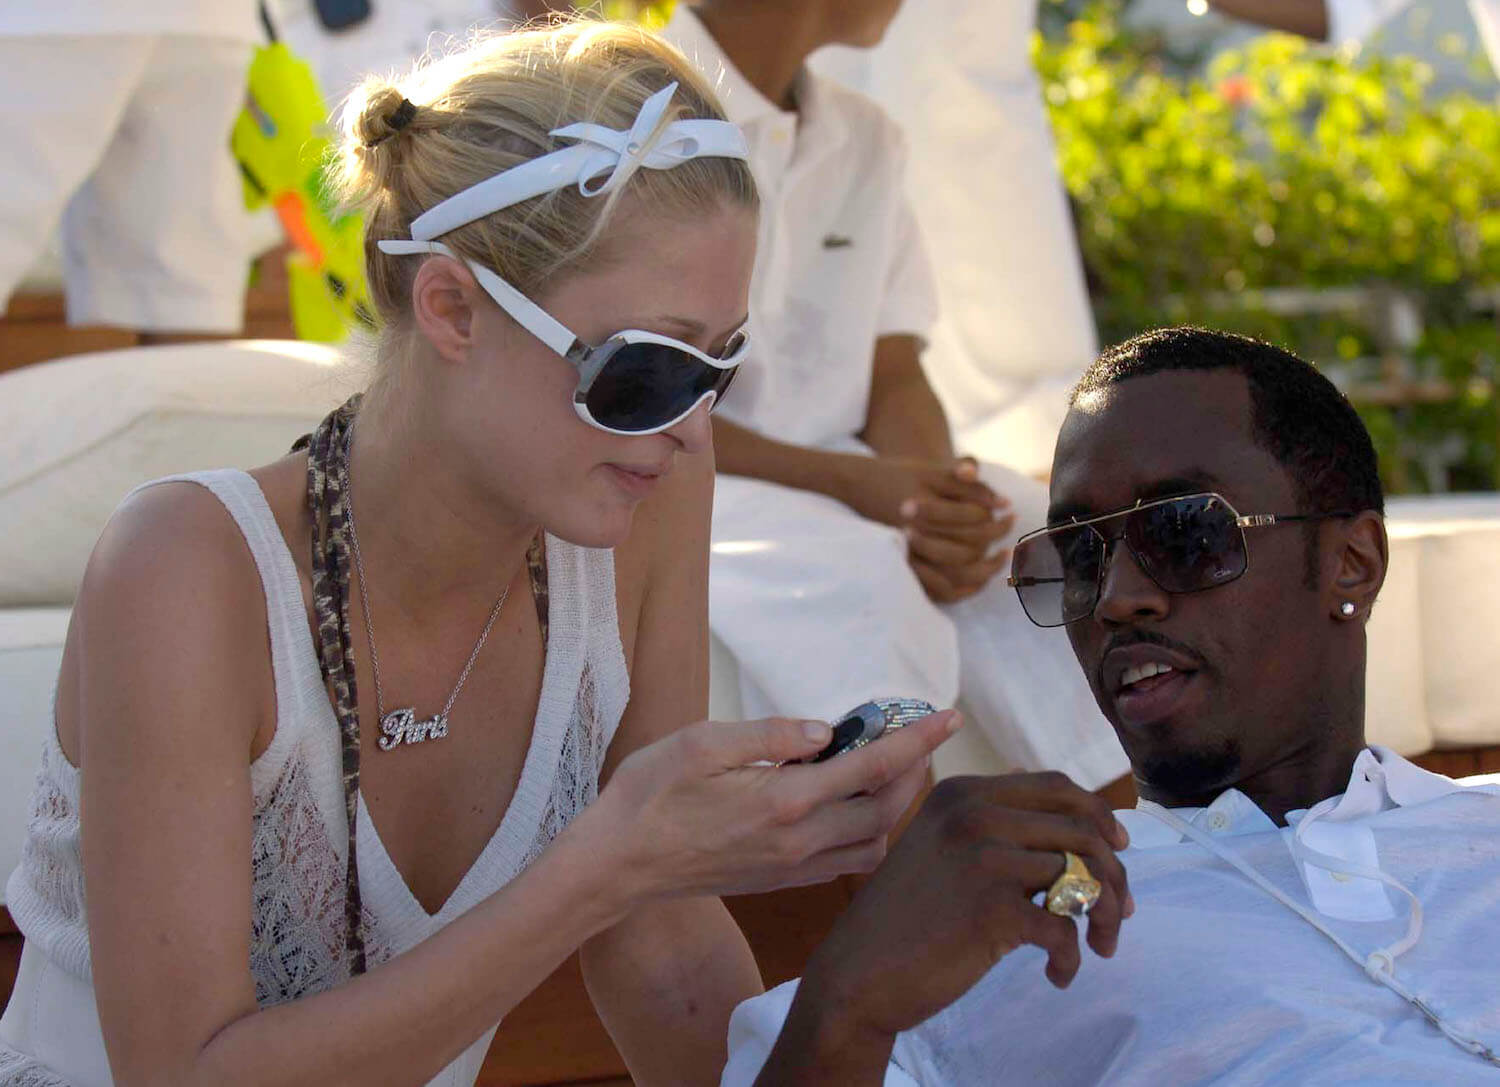 Paris Hilton sitting next to Sean 'P. Diddy' Combs outside. They're both wearing white.